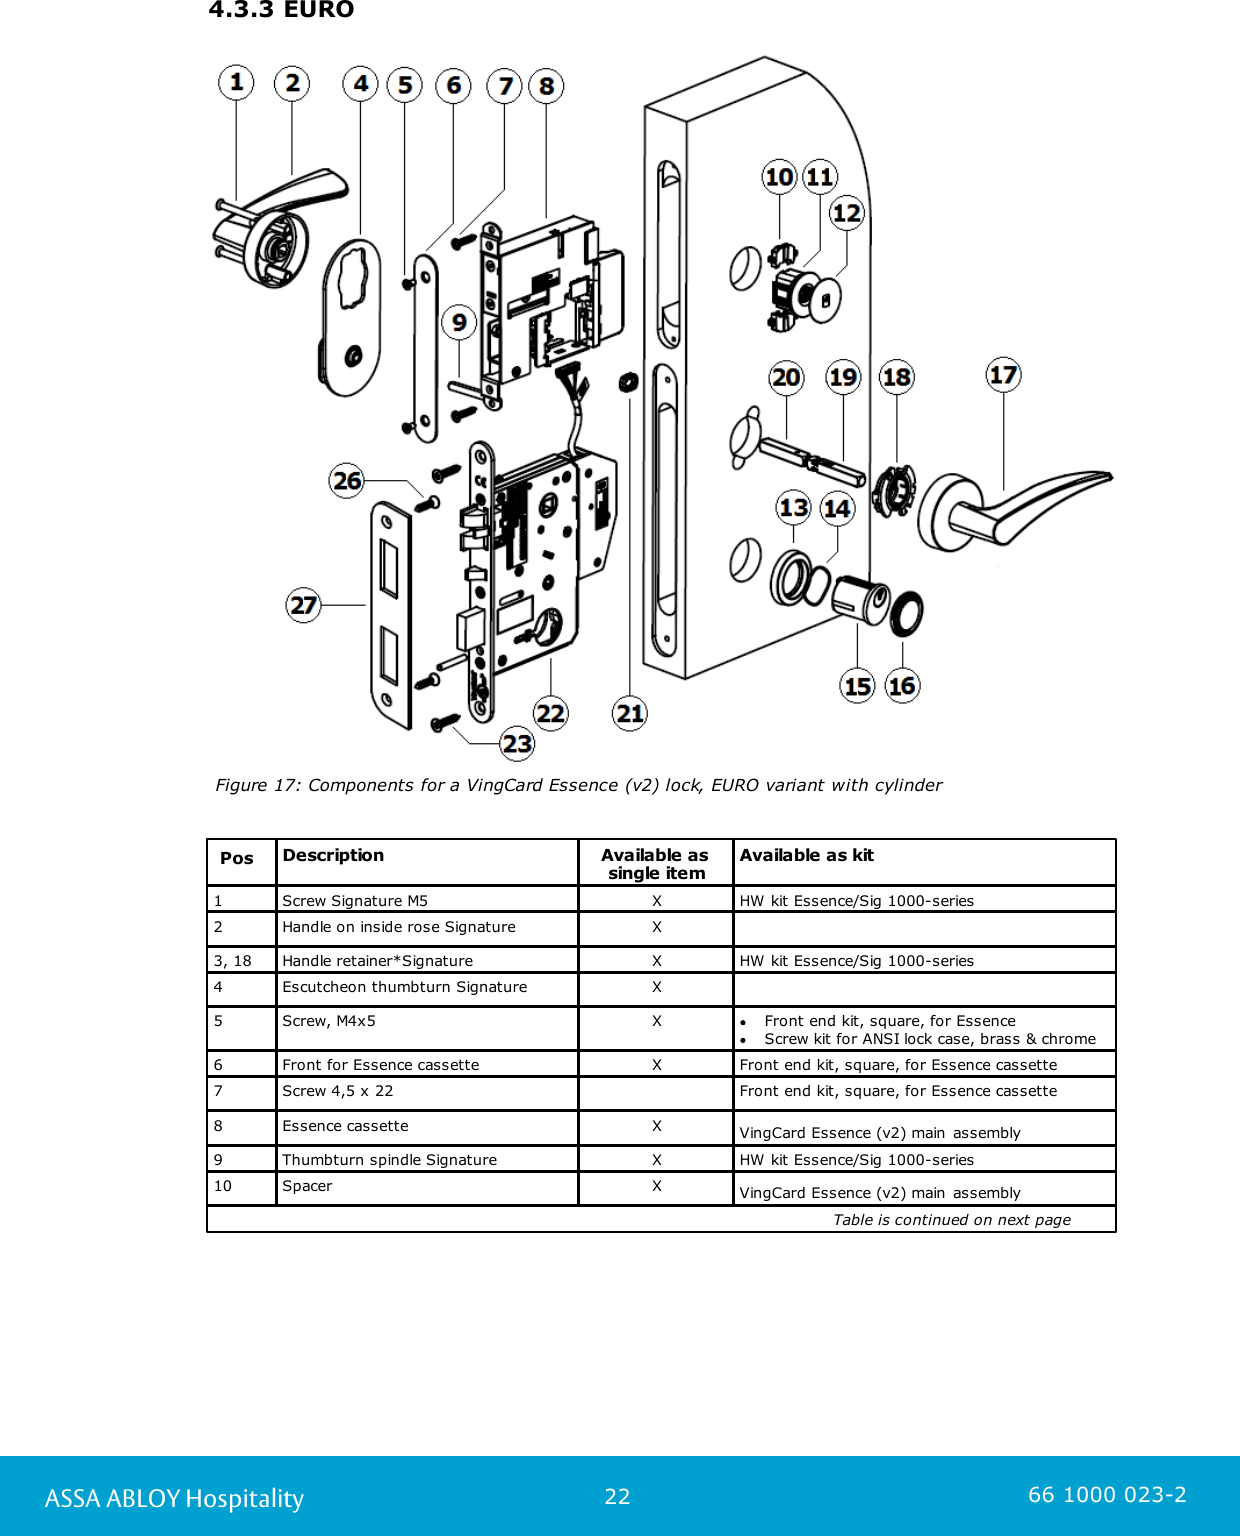 22ASSA ABLOY Hospitality 66 1000 023-24.3.3 EURO Figure 17: Components for a VingCard Essence (v2) lock, EURO variant with cylinder  PosDescriptionAvailable as single itemAvailable as kit1Screw Signature M5 XHW kit Essence/Sig 1000-series2Handle on inside rose Signature X3, 18Handle retainer*Signature XHW kit Essence/Sig 1000-series4Escutcheon thumbturn SignatureX5Screw, M4x5XFront end kit, square, for Essence Screw kit for ANSI lock case, brass &amp; chrome6Front for Essence cassetteXFront end kit, square, for Essence cassette7Screw 4,5 x 22Front end kit, square, for Essence cassette8Essence cassette XVingCard Essence (v2) main assembly9Thumbturn spindle SignatureXHW kit Essence/Sig 1000-series10SpacerXVingCard Essence (v2) main assembly                                                                                                                       Table is continued on next page